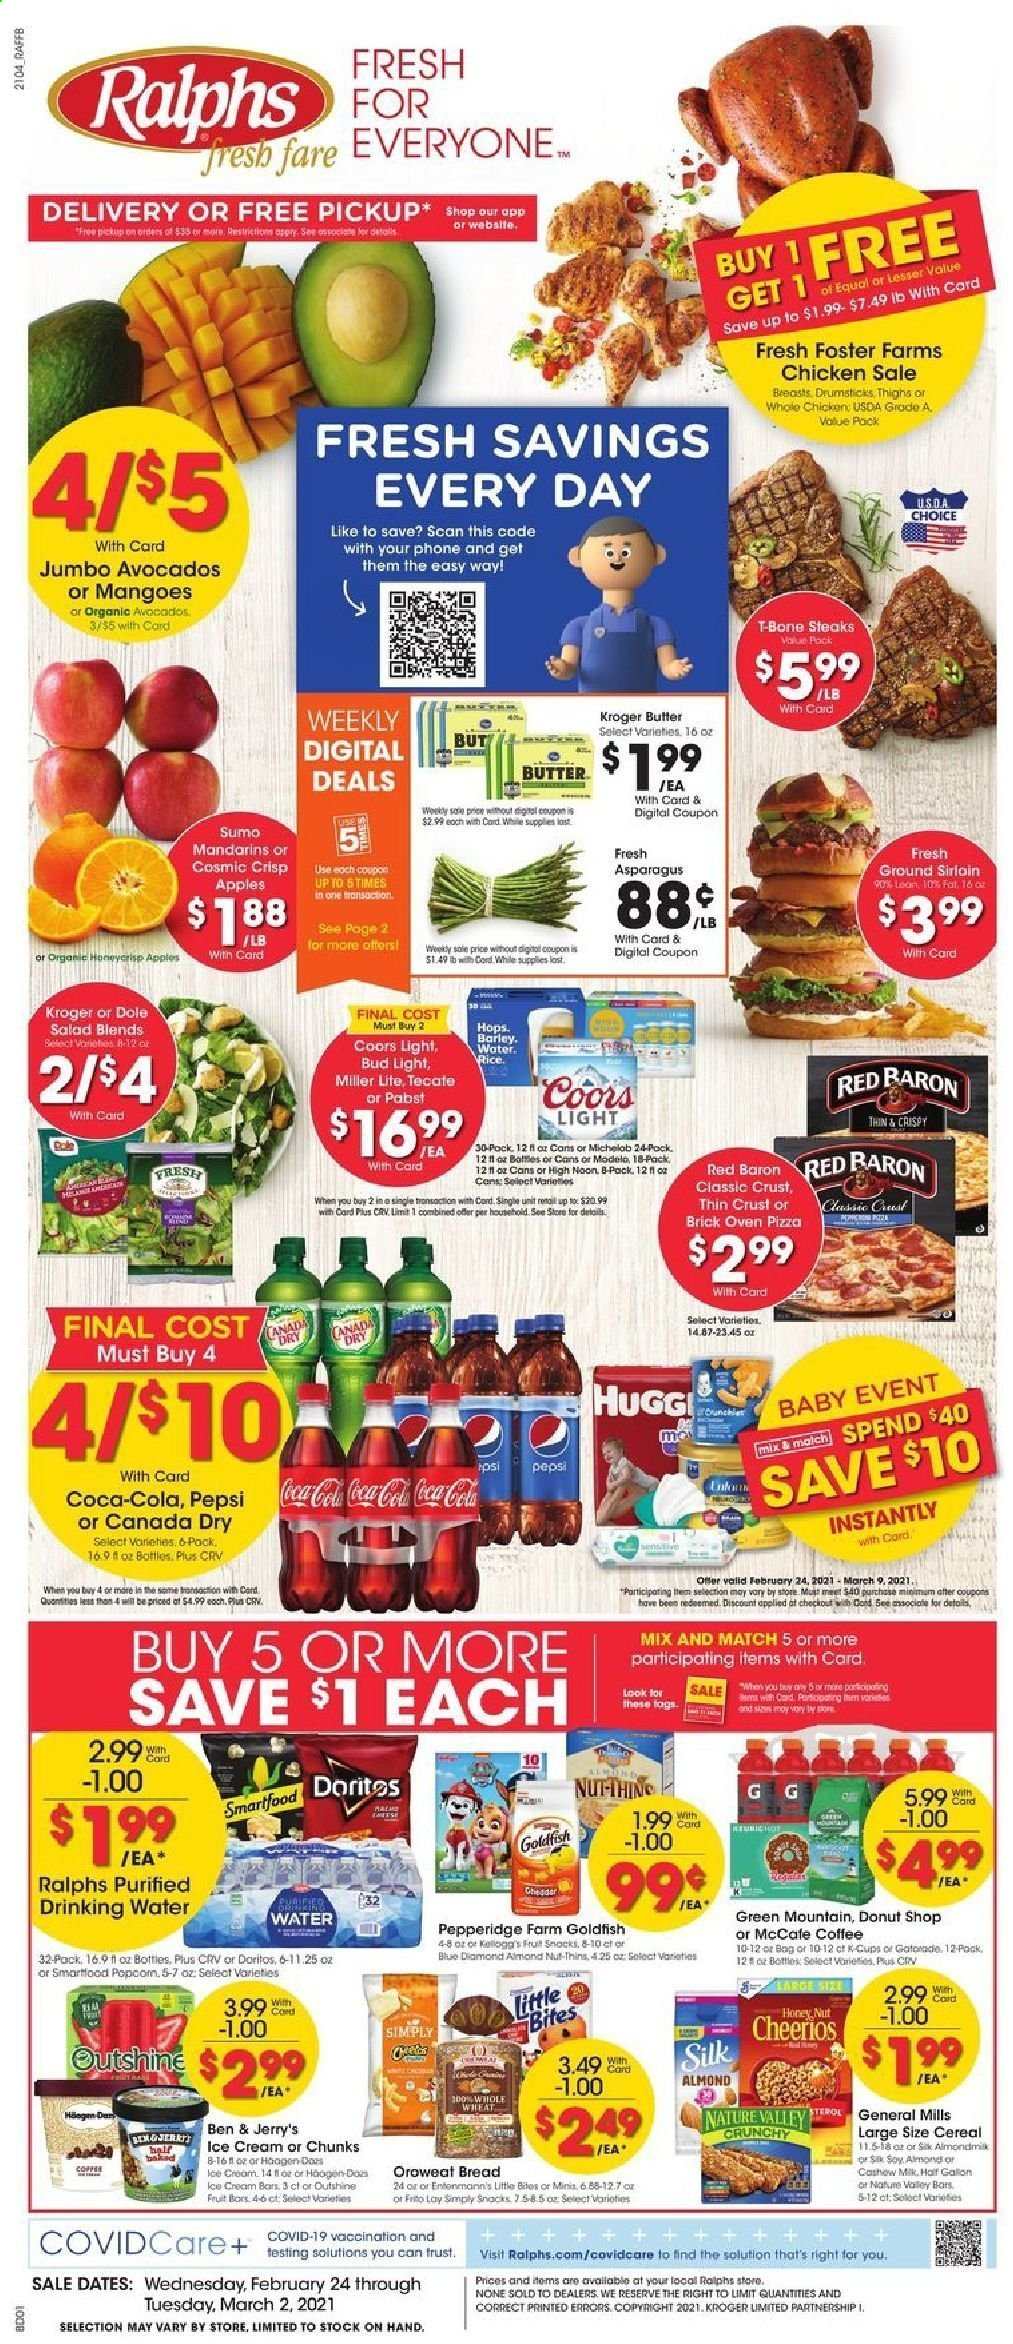 thumbnail - Ralphs Flyer - 02/24/2021 - 03/02/2021 - Sales products - Trust, Dole, bread, Little Bites, apples, pizza, salad, Silk, butter, ice cream, Ben & Jerry's, mango, Red Baron, Doritos, snack, Smartfood, Thins, Goldfish, mandarines, cereals, Cheerios, Blue Diamond, Canada Dry, Coca-Cola, Pepsi, coffee, coffee capsules, L'Or, K-Cups, Green Mountain, beer, Miller Lite, Coors, Bud Light, Modelo, whole chicken, beef meat, t-bone steak, steak, Lee. Page 1.